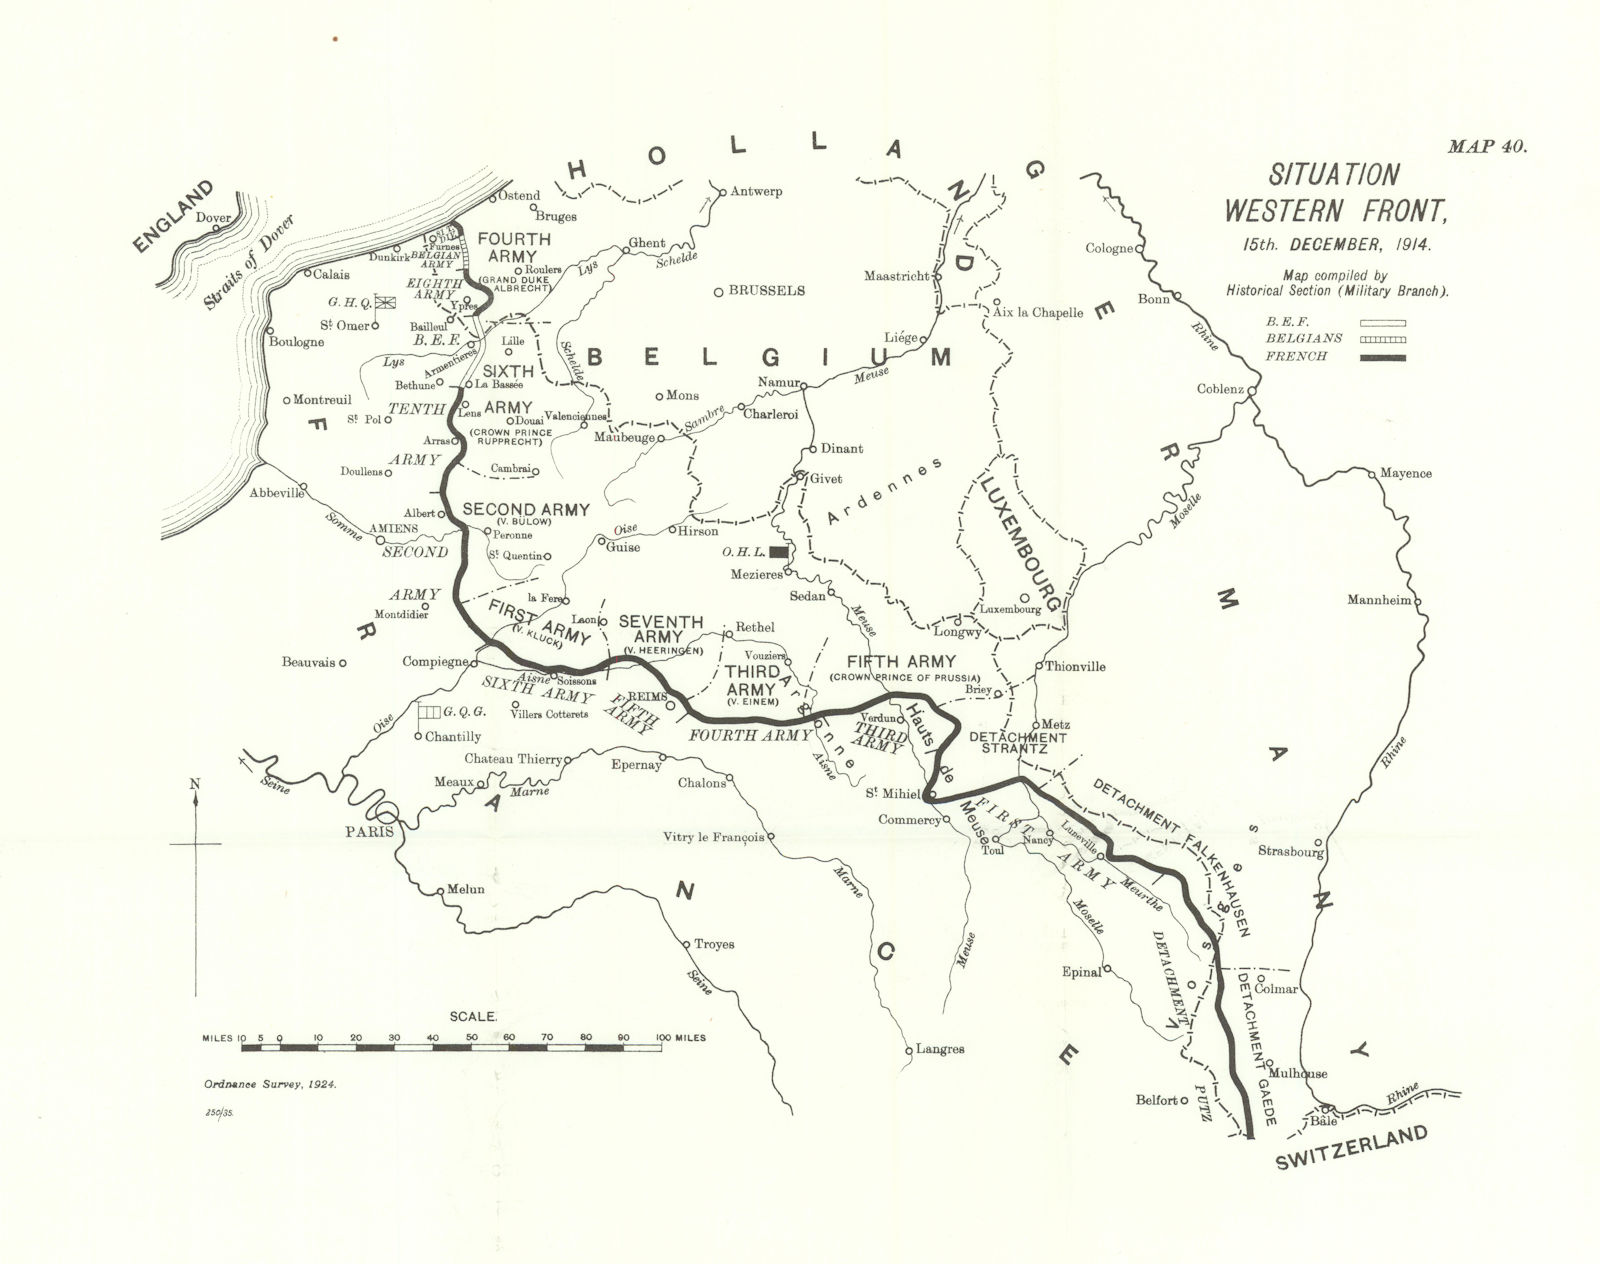 Associate Product Situation Western Front, 15th December, 1914. First World War. 1933 old map